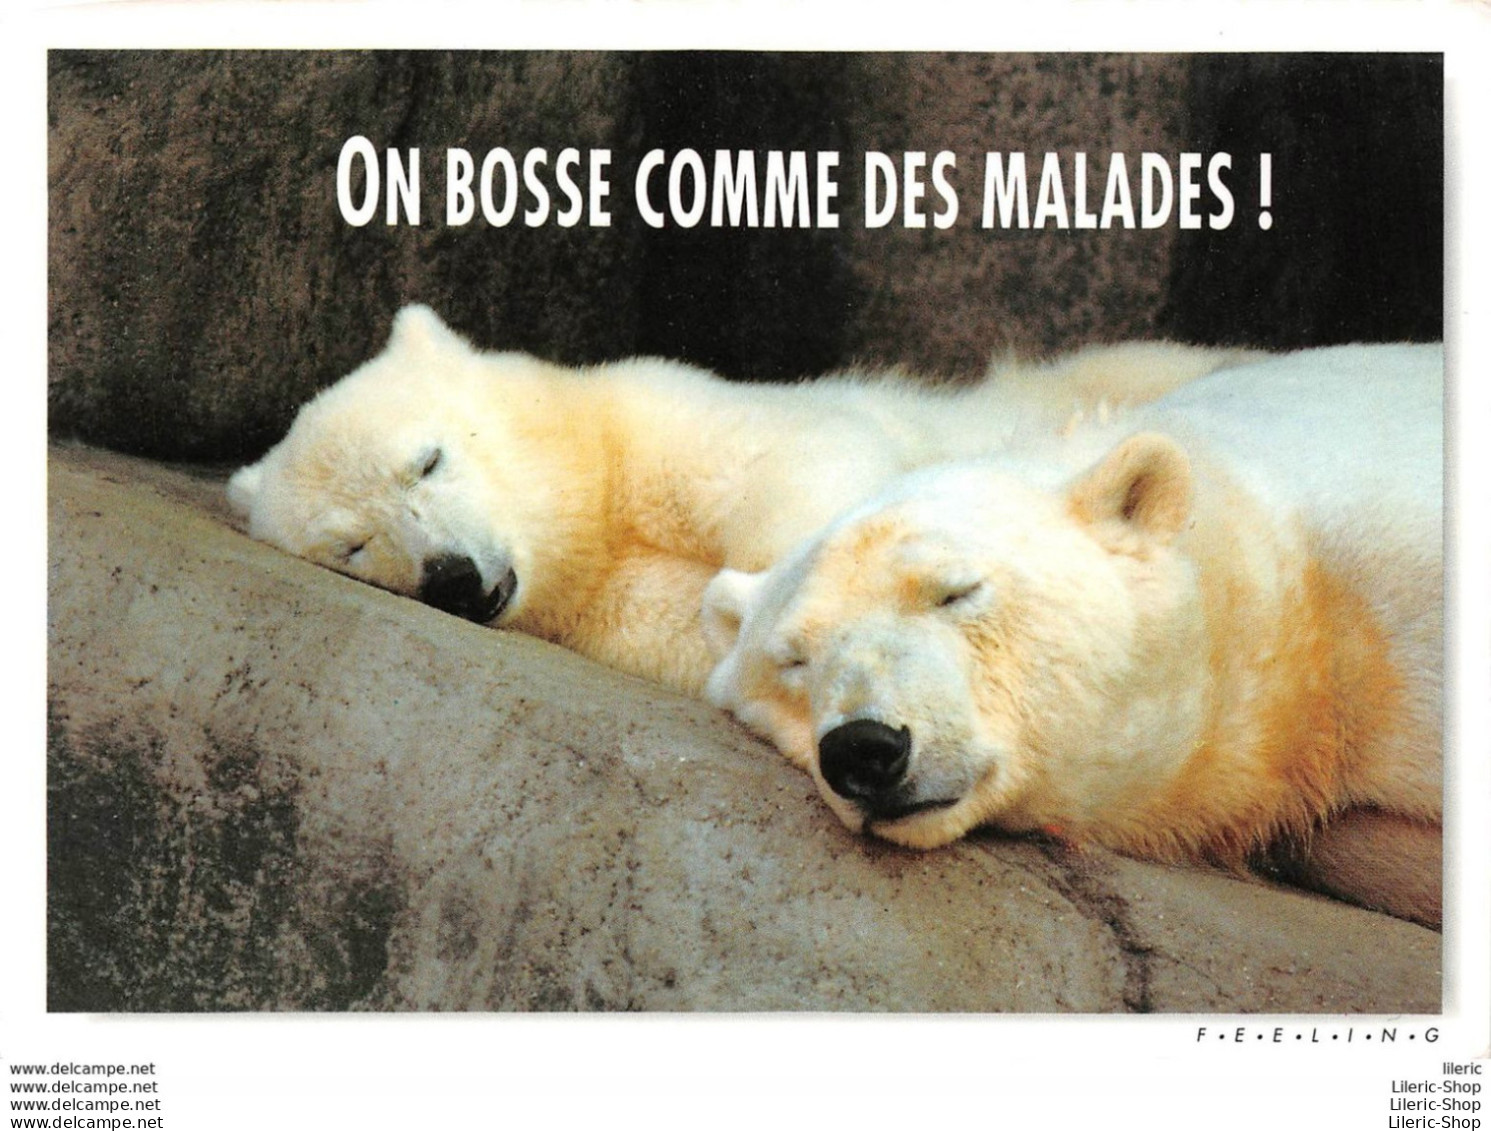 CPM HUMOUR COMIC " ON BOSSE COMME DES MALADES ! " # OURS # BEAR # BÄR # ORSO # OSO #- PHOTO ROBERT CUSHMAN HAYES - Ours